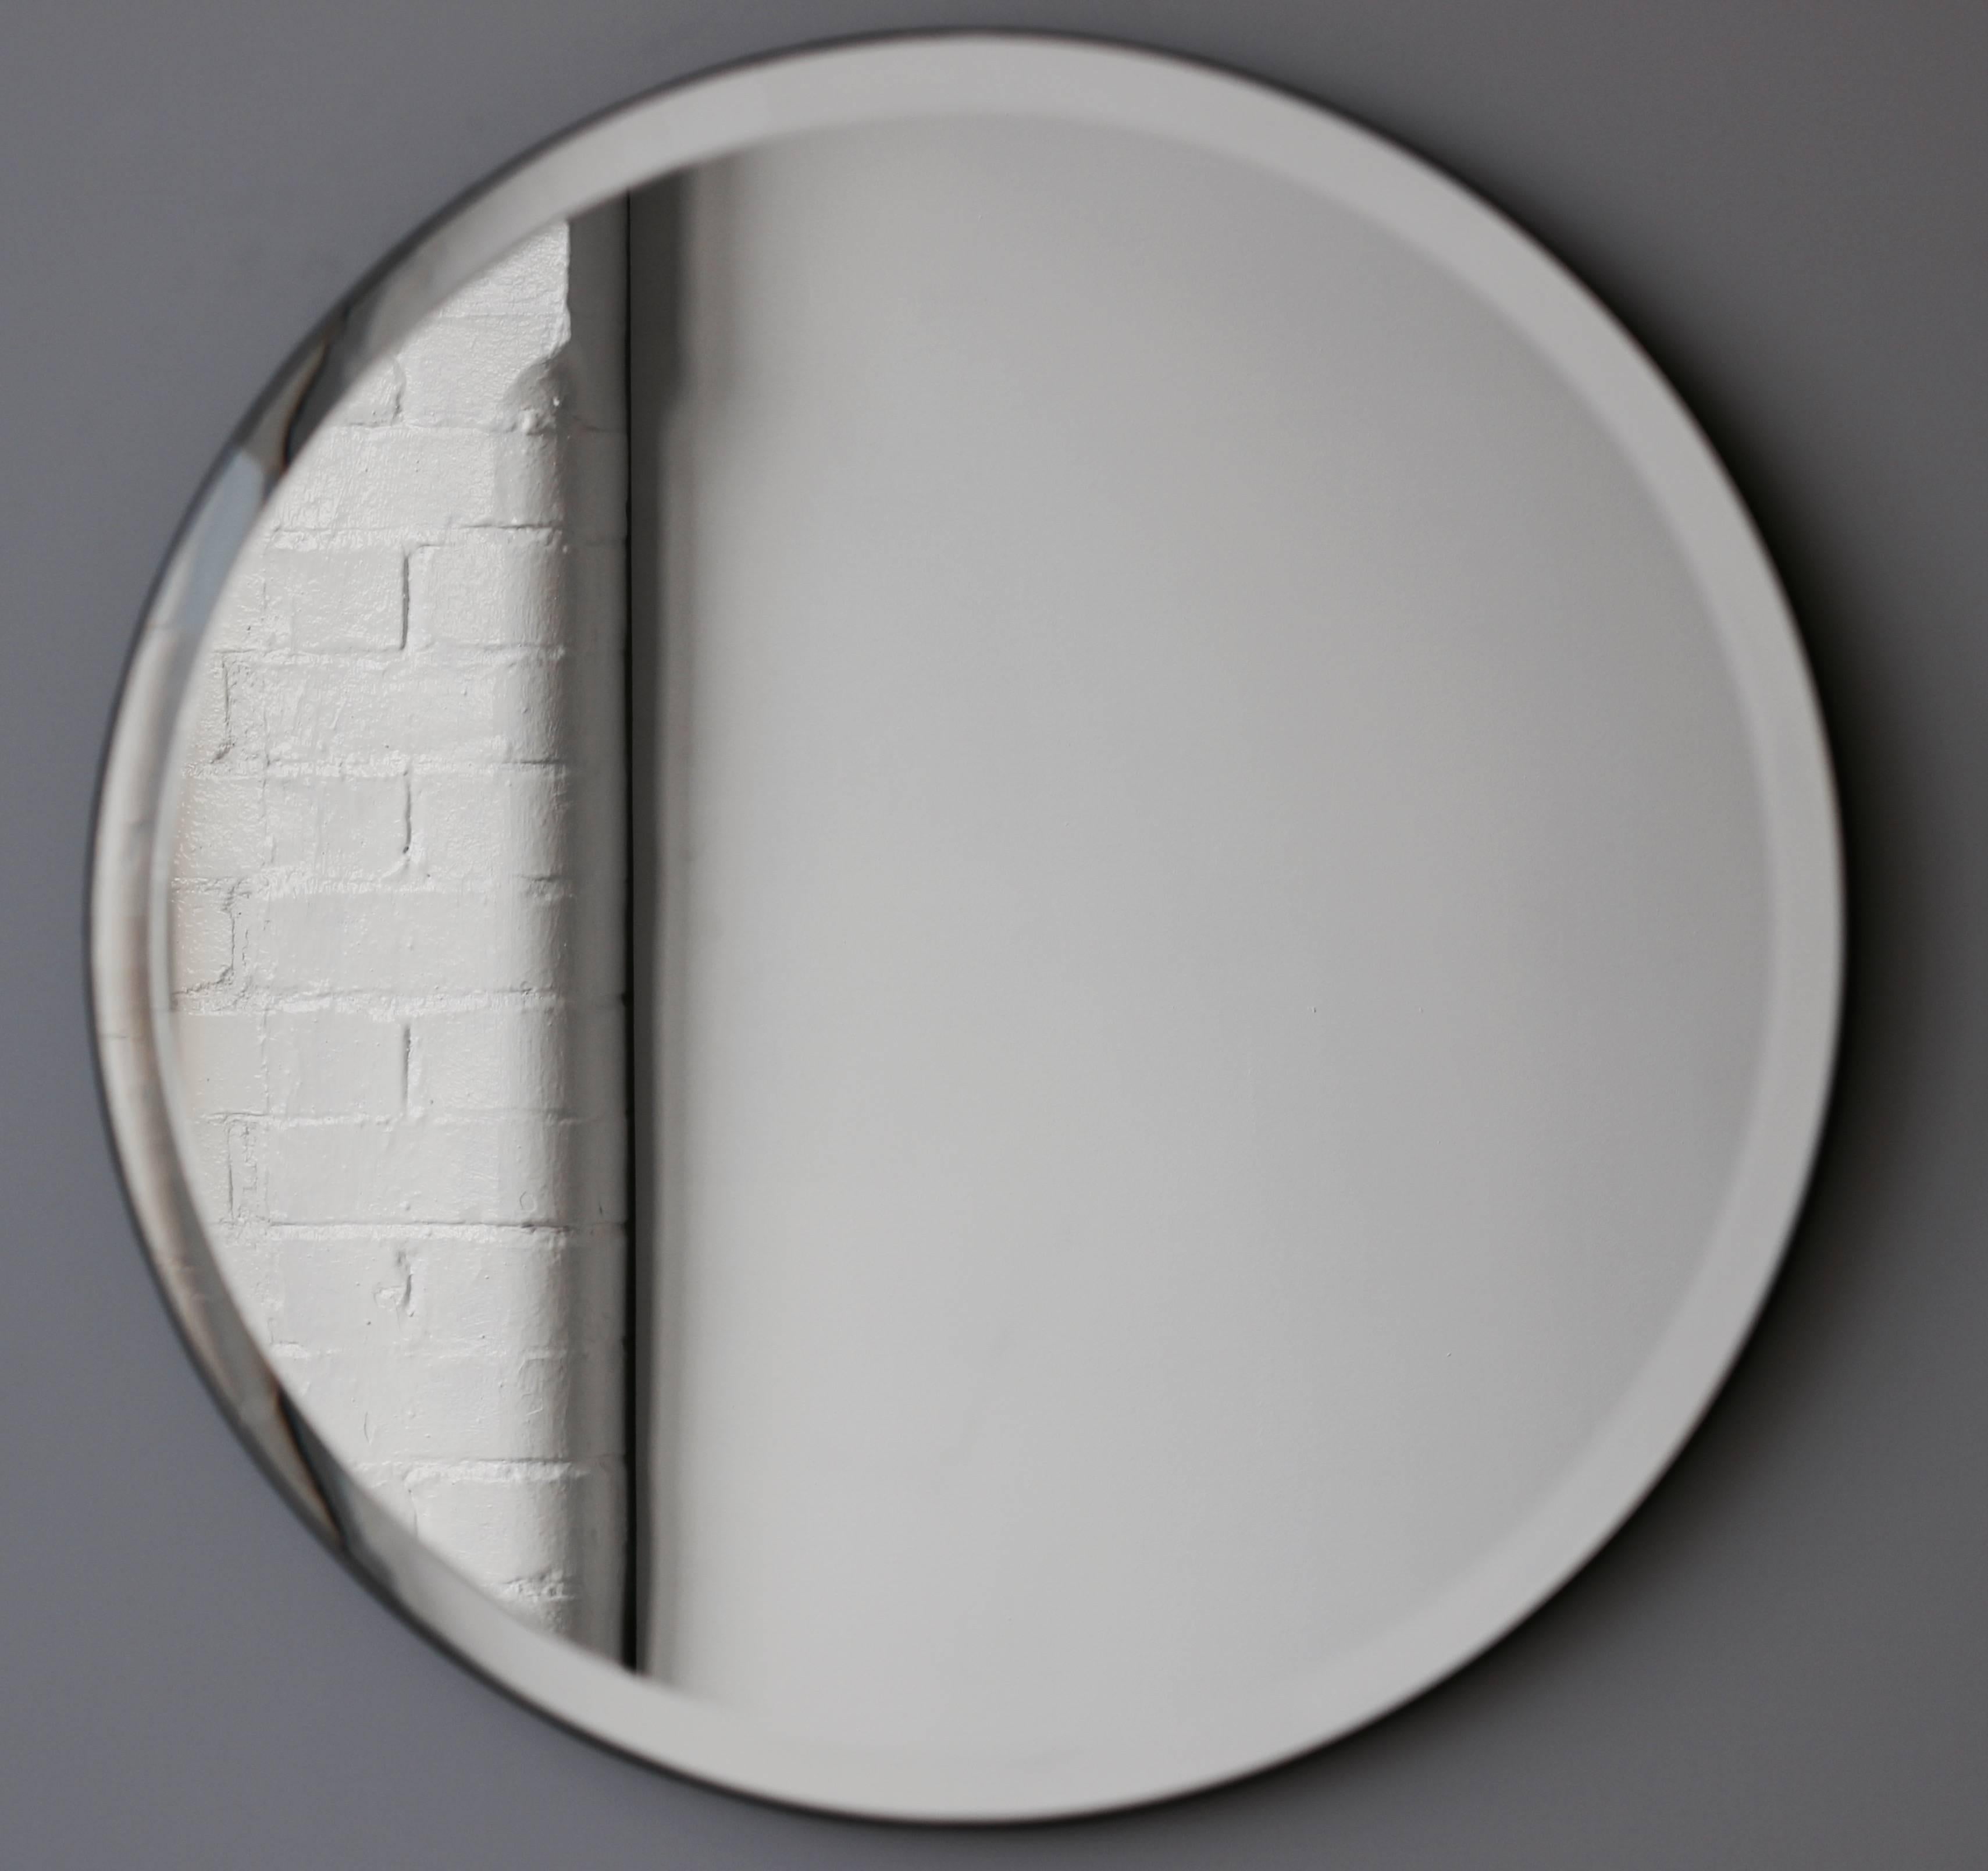 Art Deco style Orbis™ round frameless mirror with a handcrafted bevel, velvet backing and optional brass clips. Designed and made in London, UK.

Our mirrors are designed with an integrated French cleat (split batten) system that ensures the mirror